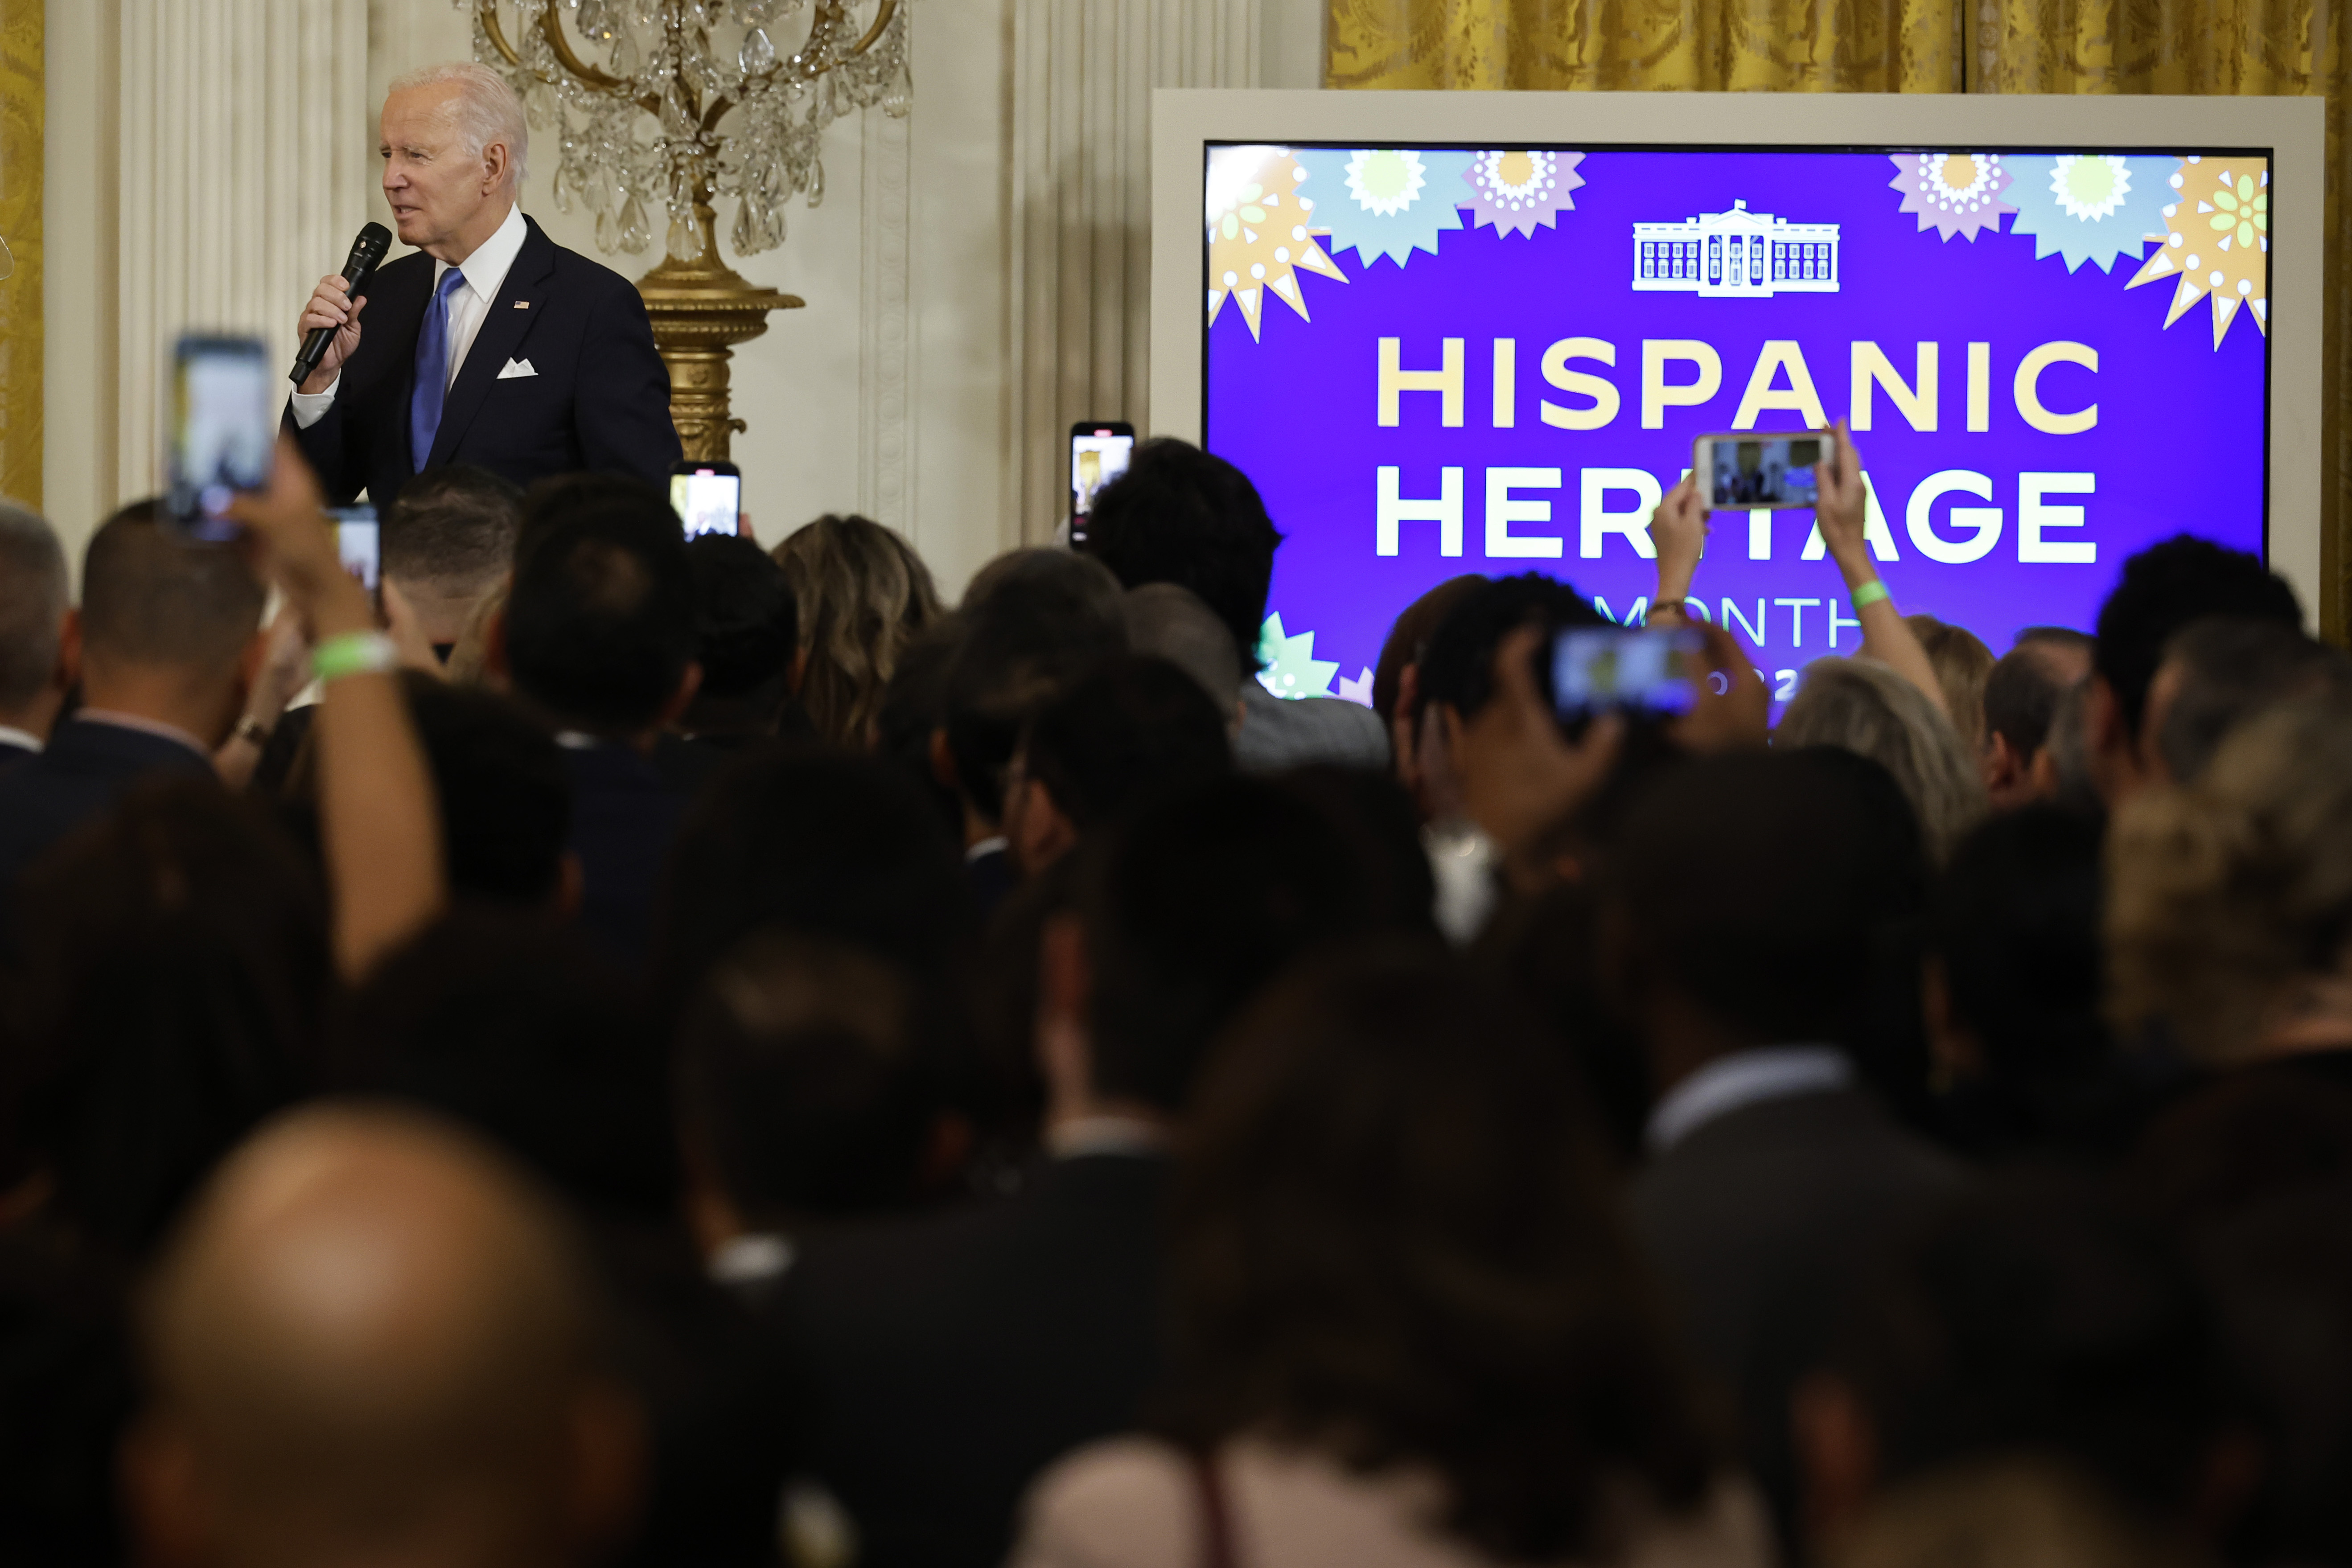 President Biden speaks before a crowd at the White House’s Hispanic Heritage Month reception.